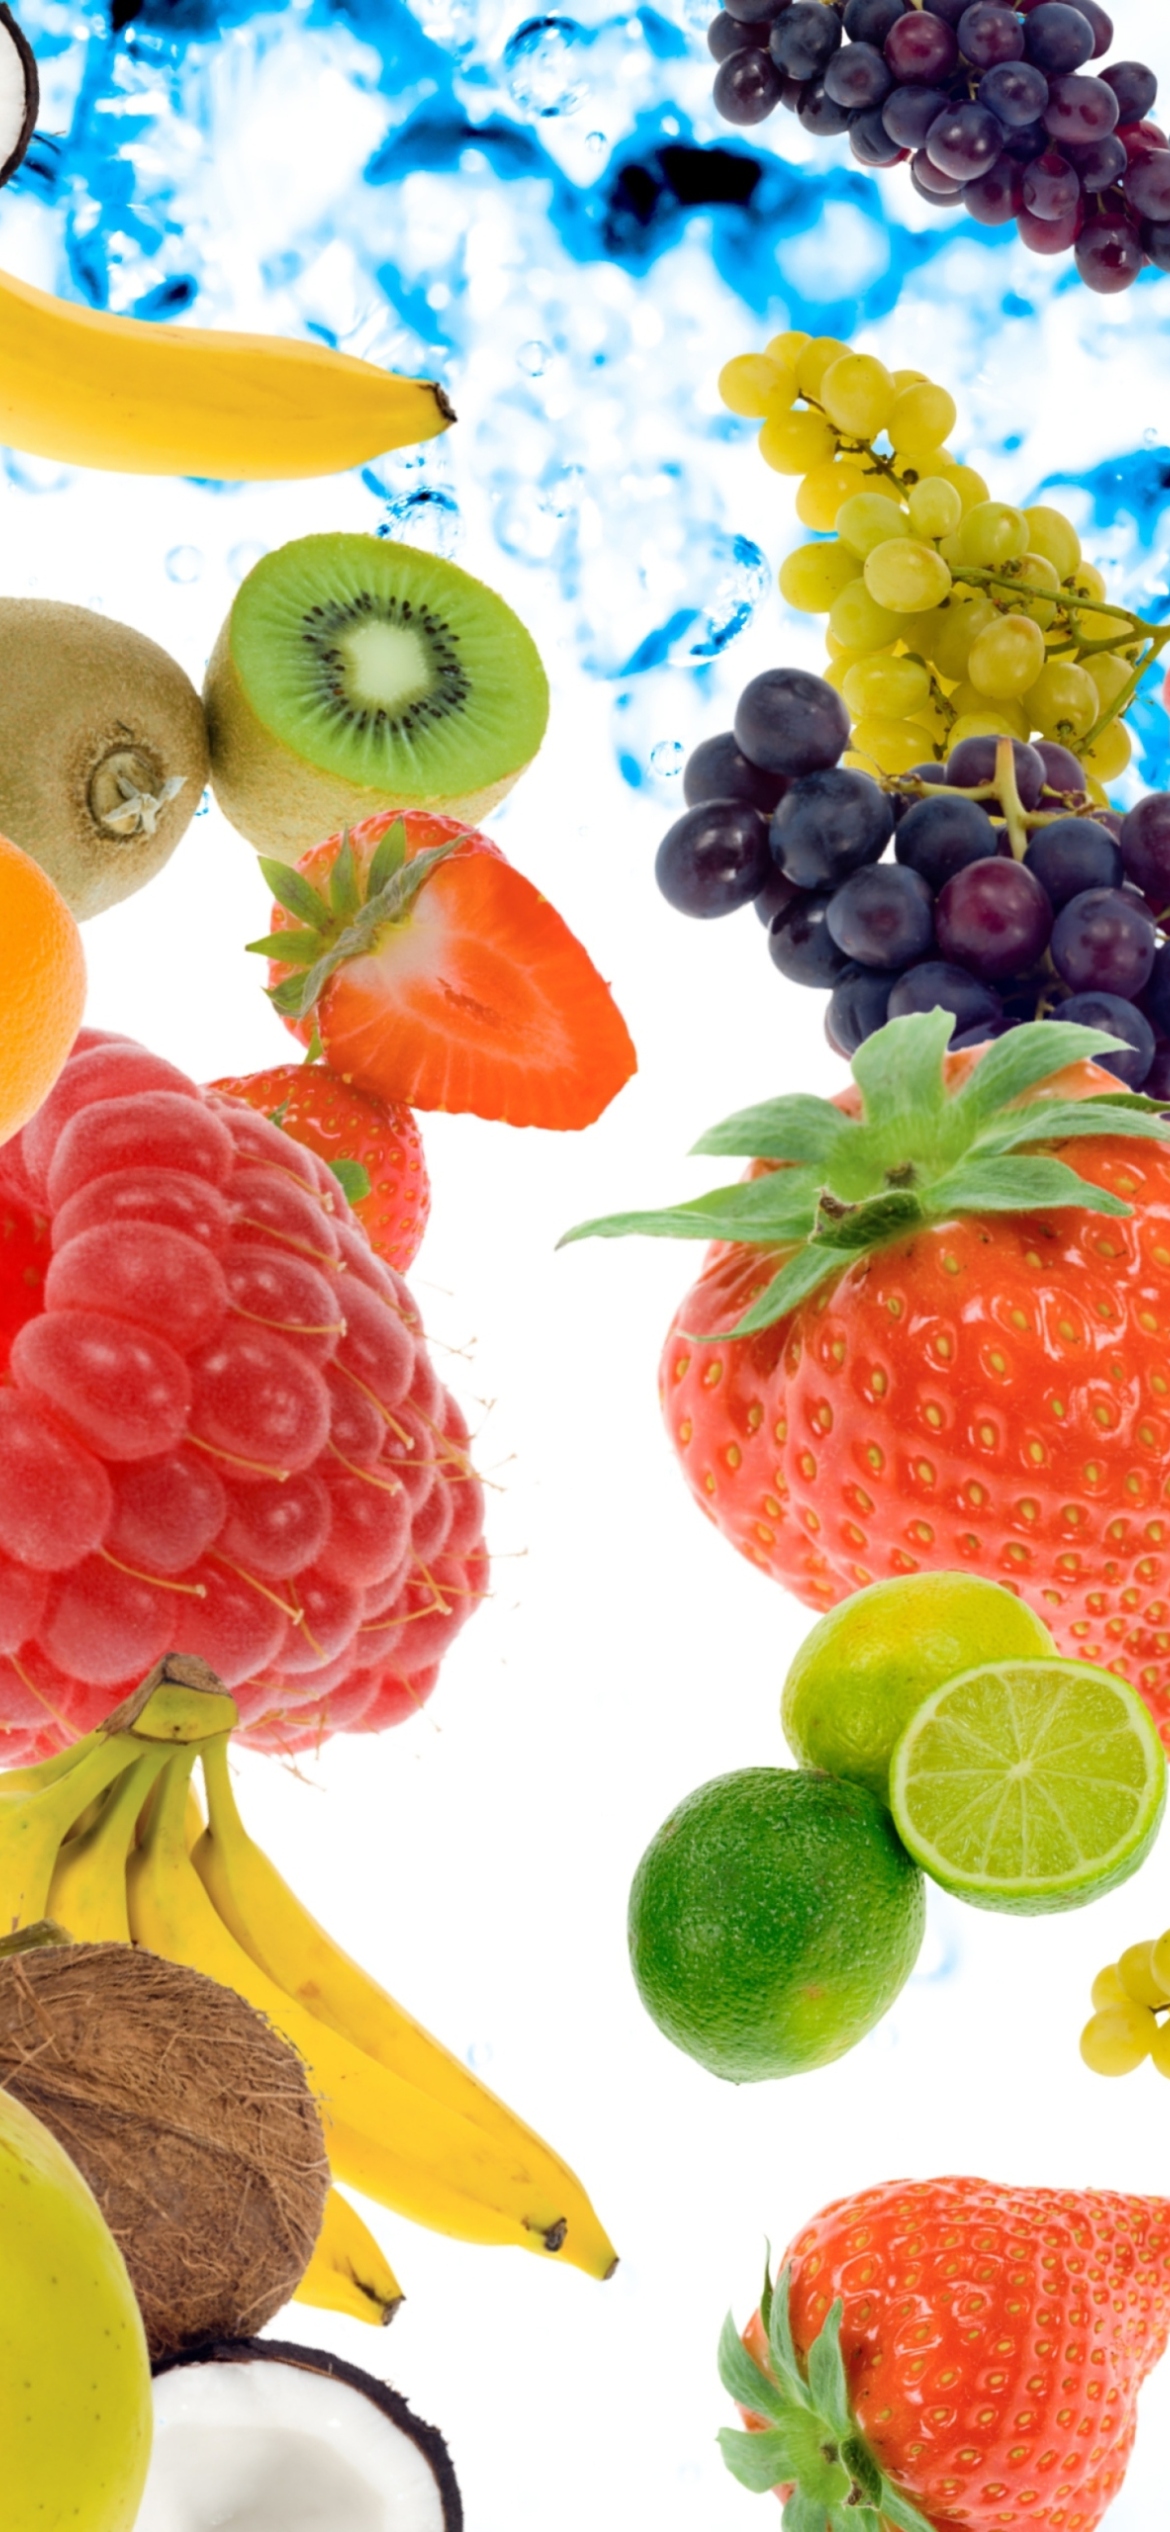 Berries And Fruits wallpaper 1170x2532